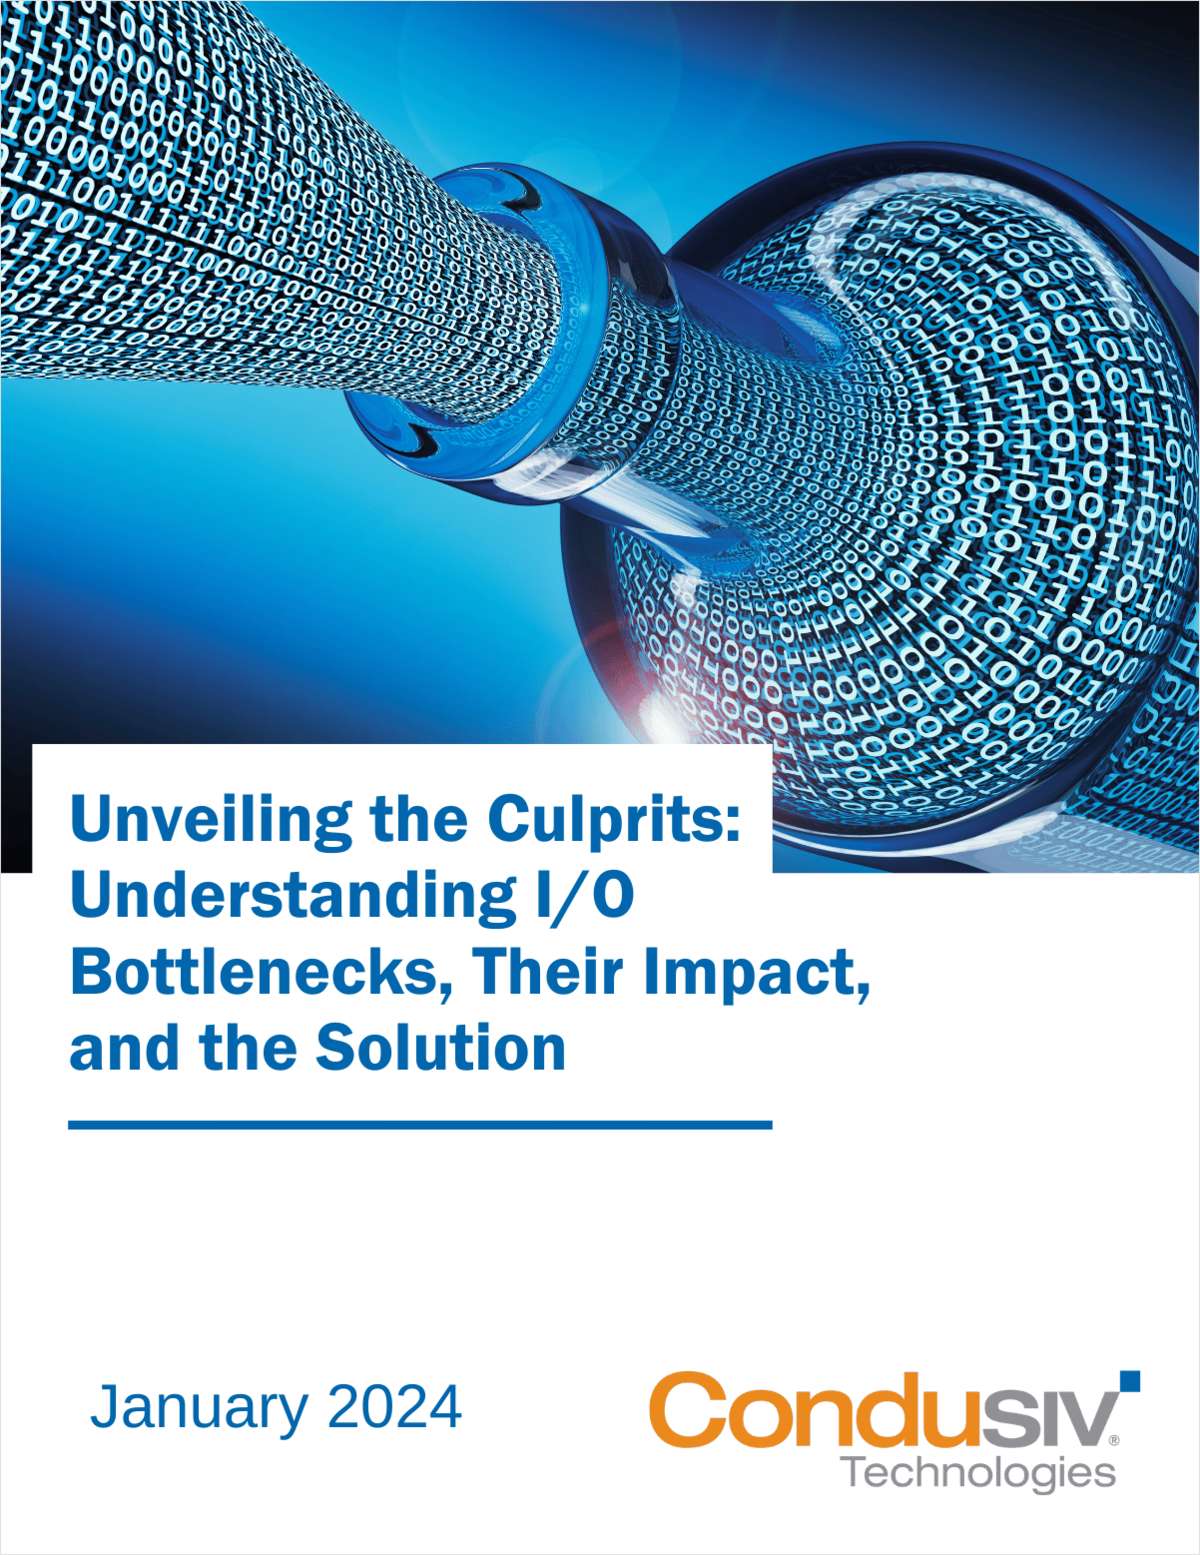 Unveiling the Culprits: Understanding I/O Bottlenecks, Their Impact, and the DymaxIO Solution